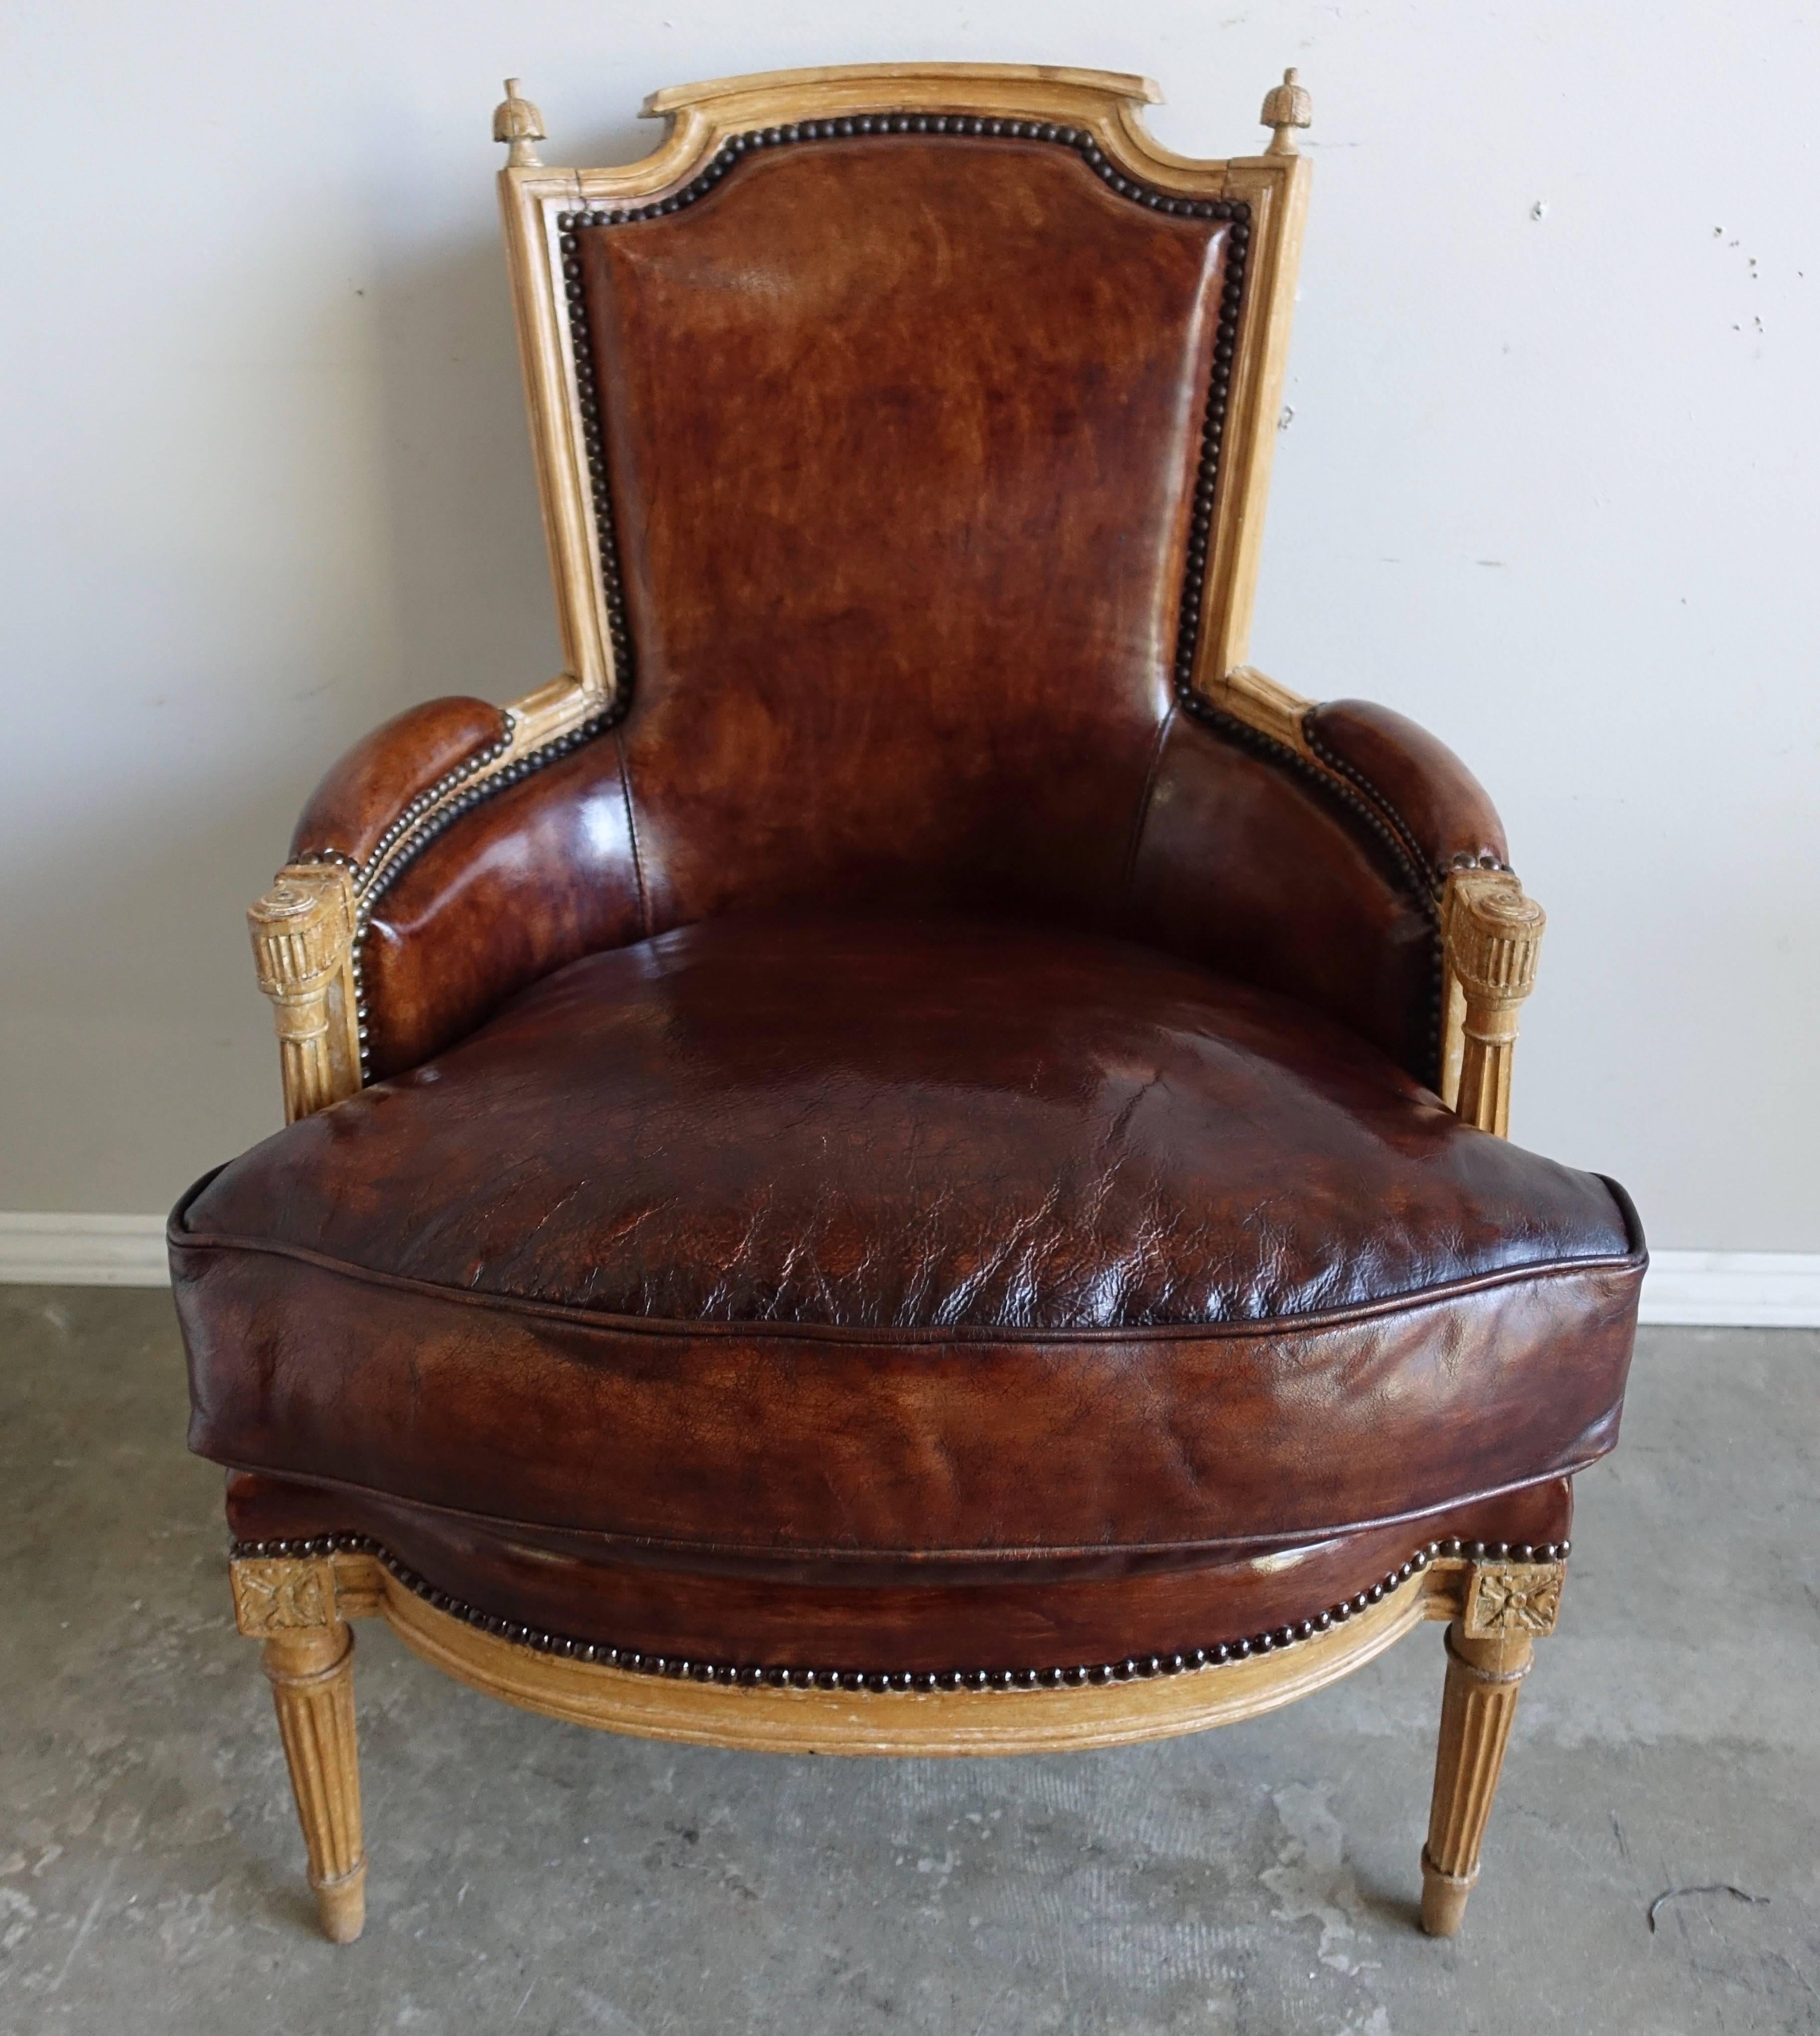 Pair of Louis XVI style leather upholstered armchairs with a bleached natural walnut finish. The chairs stand on four fluted straight legs. Loose down filled cushion.